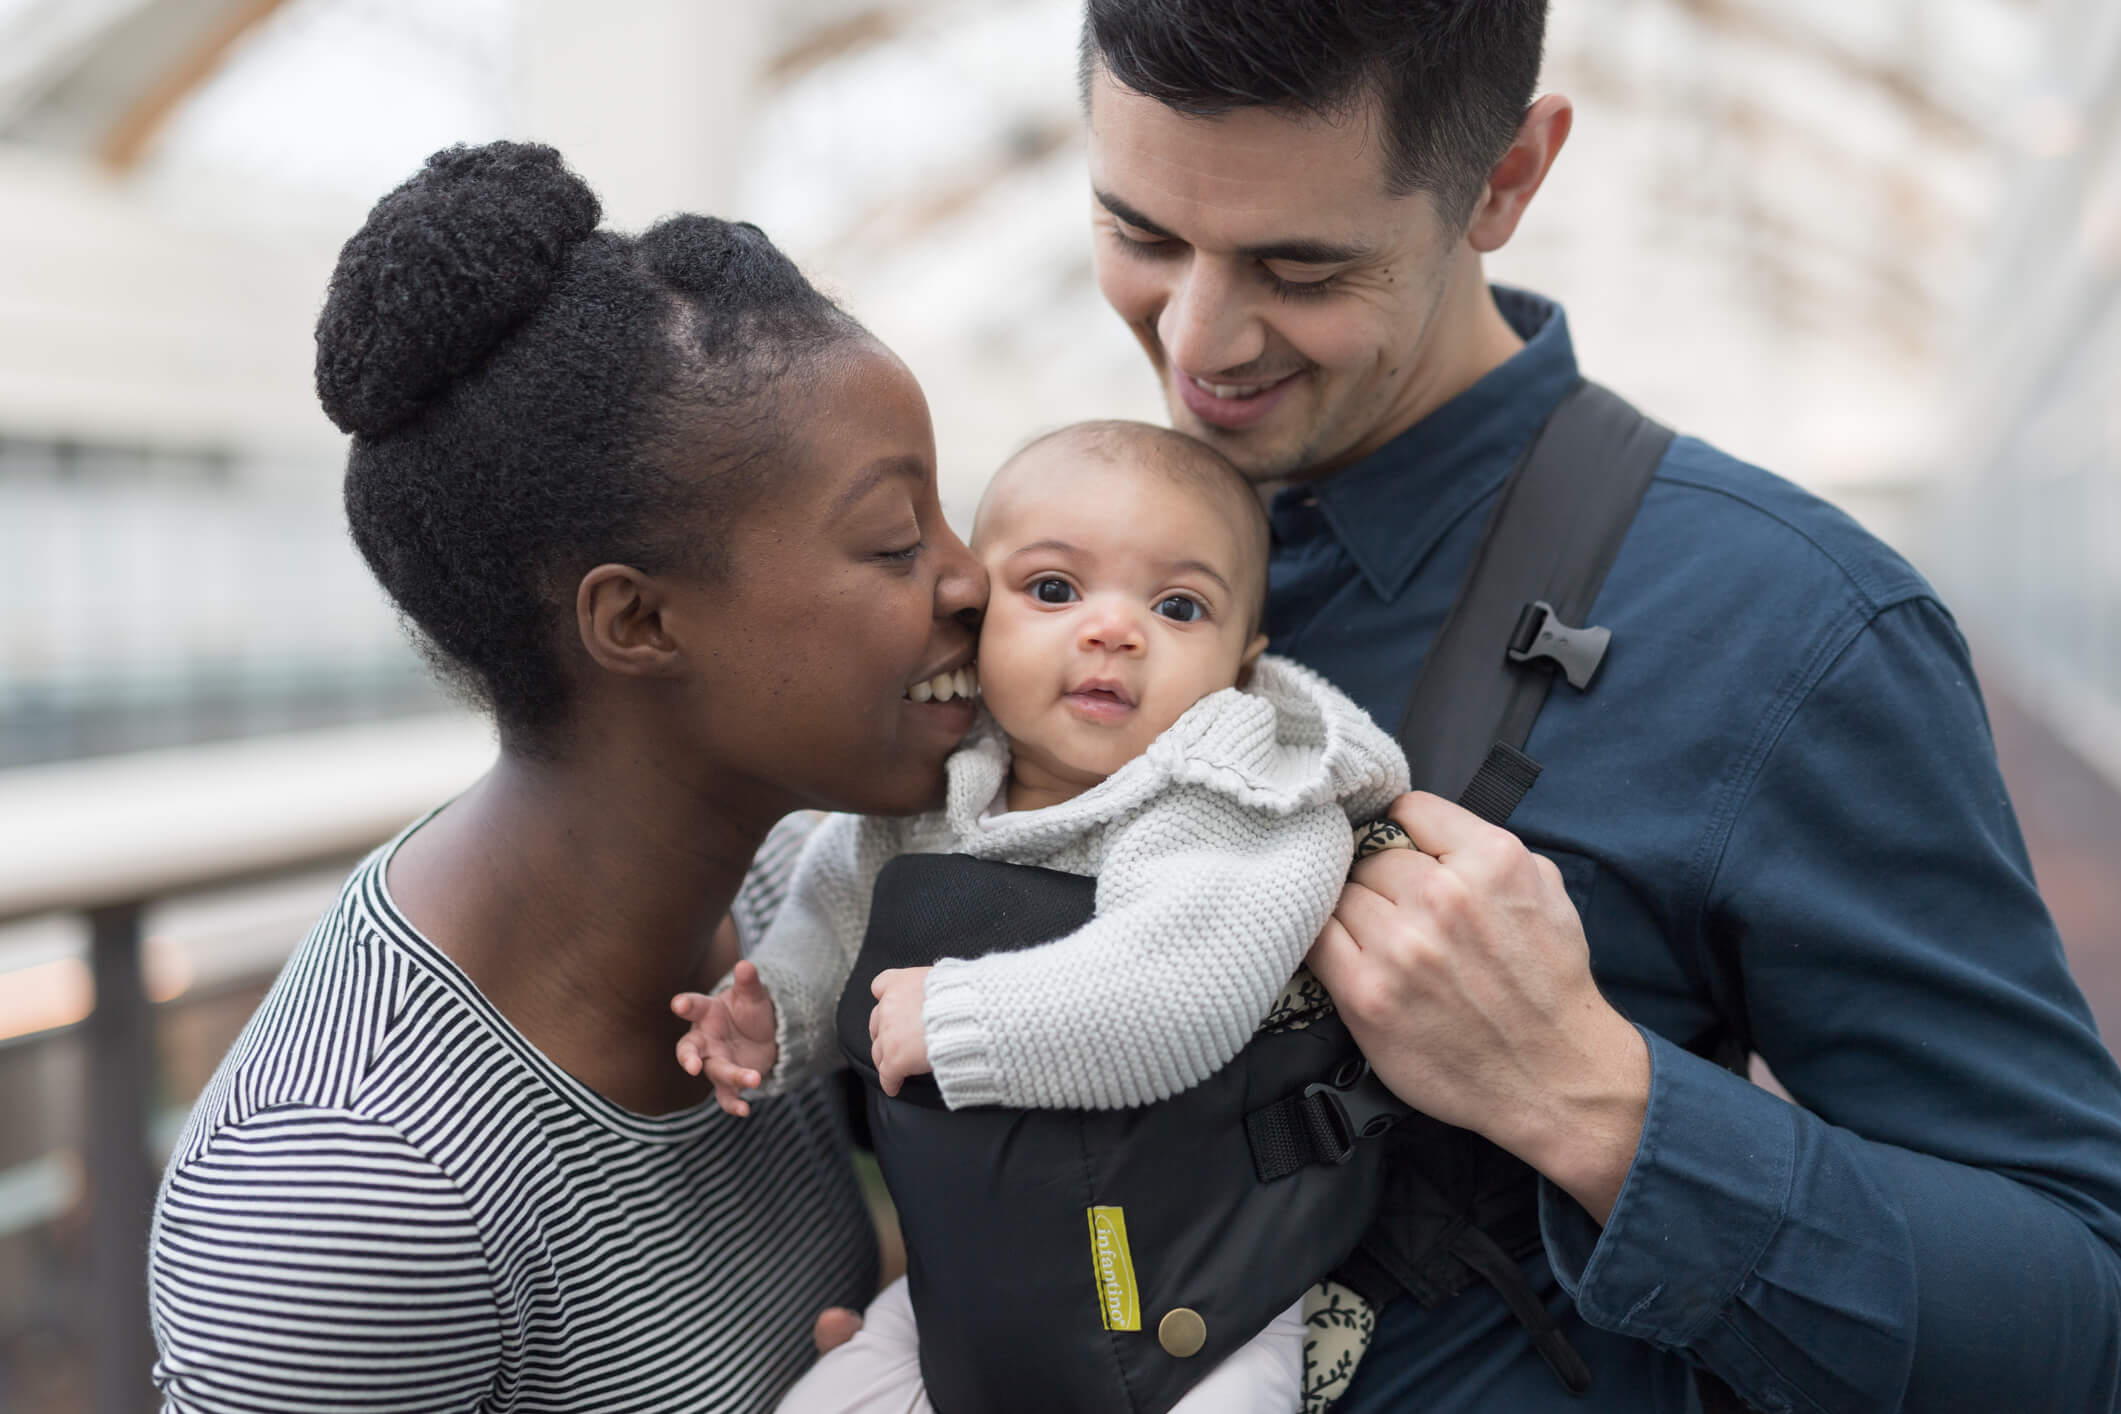 Affectionate multi-ethnic couple are shopping with their baby daughter who is riding in a baby carrier